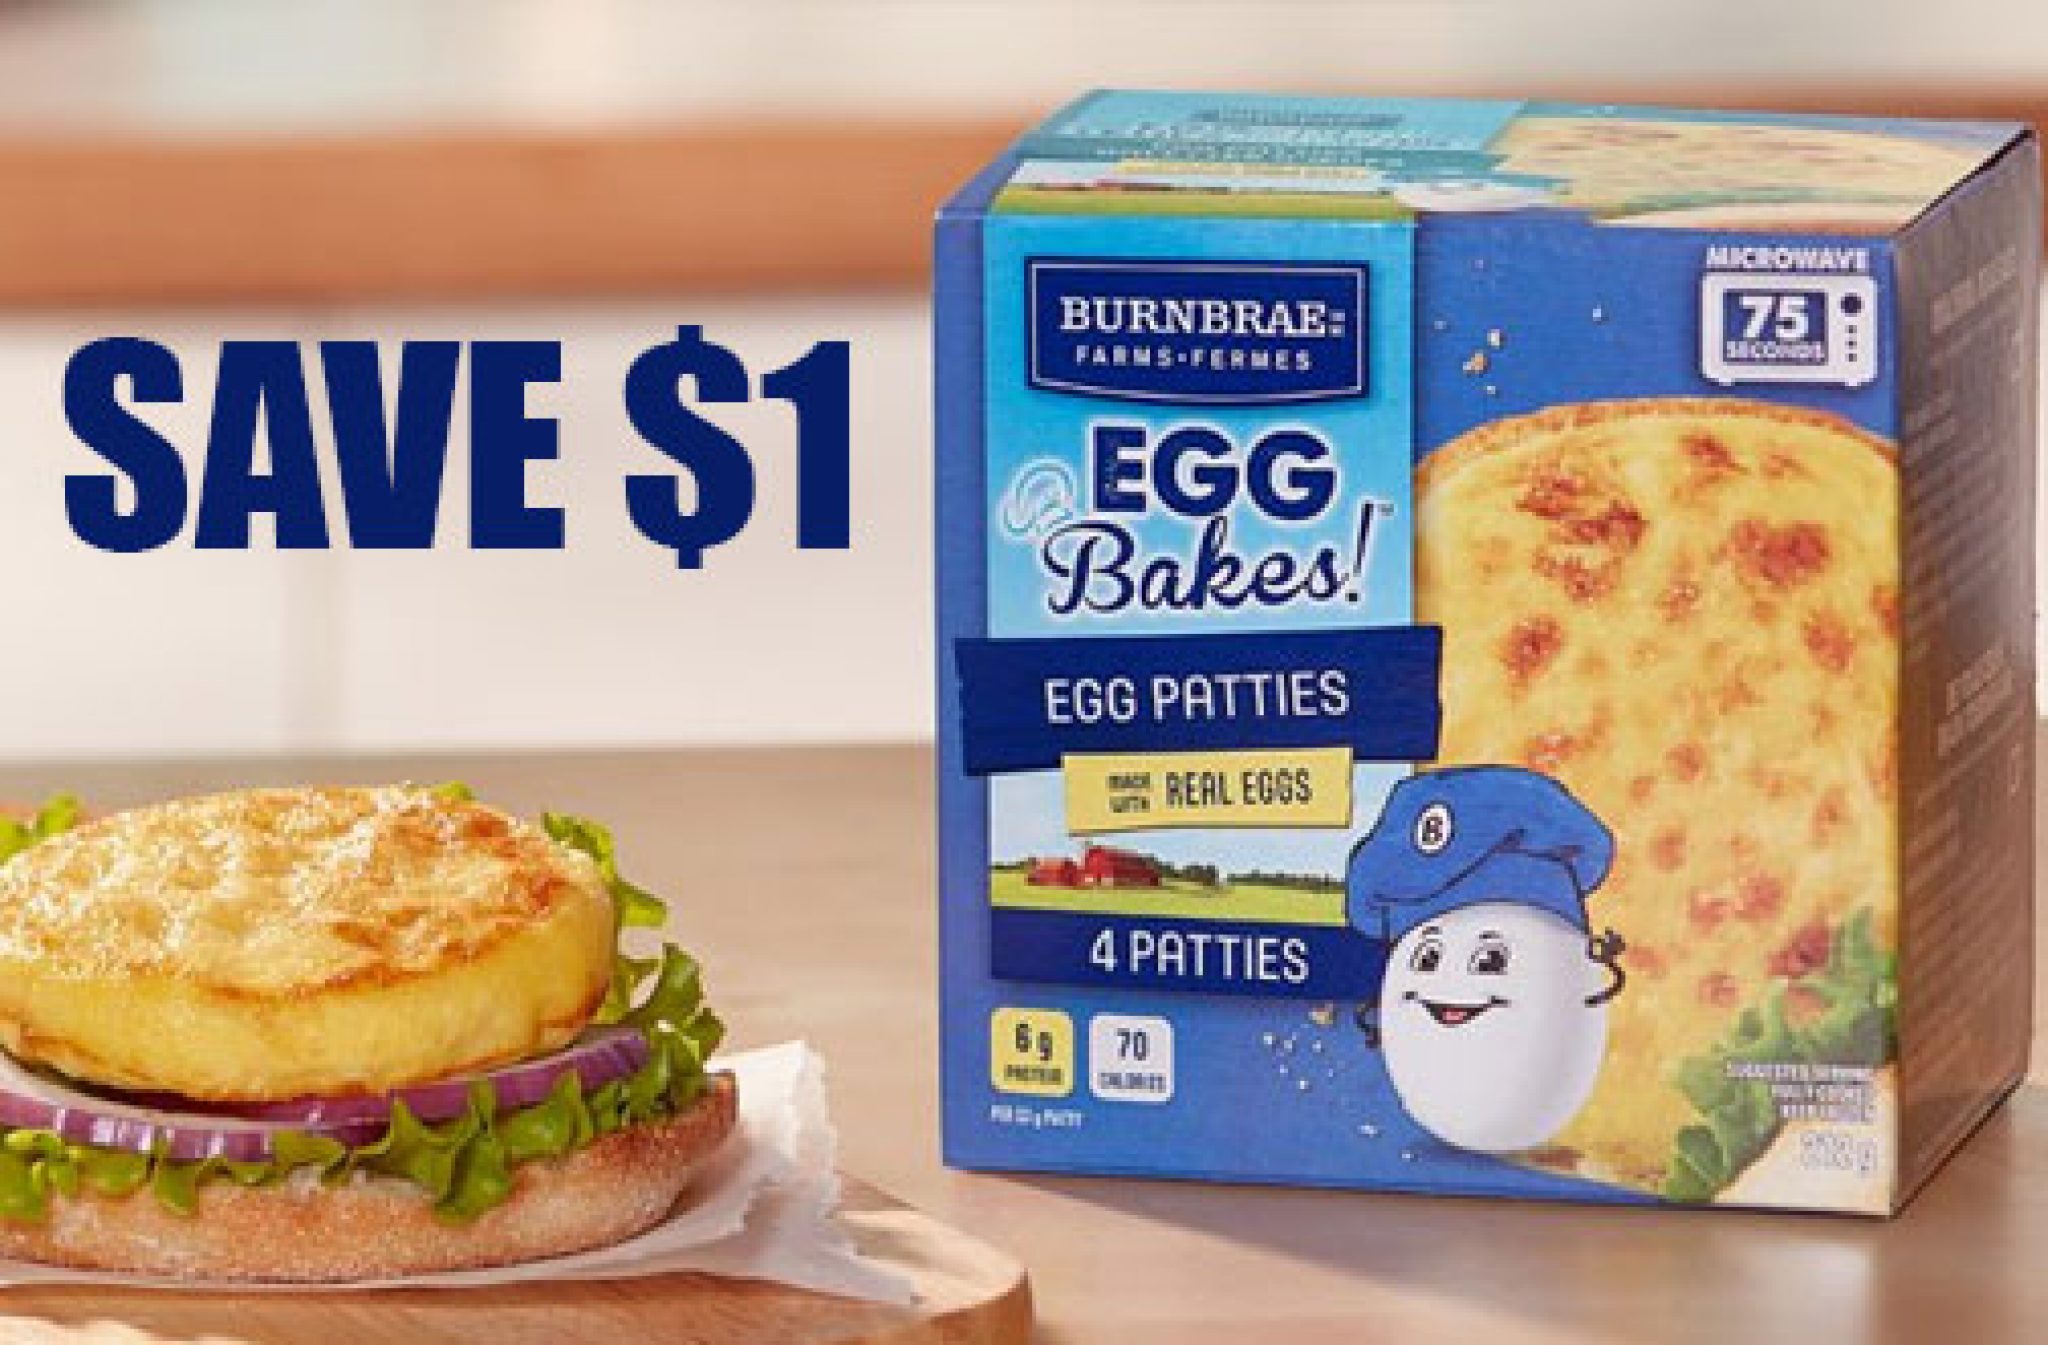 Burnbrae Farms Egg Bakes Coupon — Deals from SaveaLoonie!